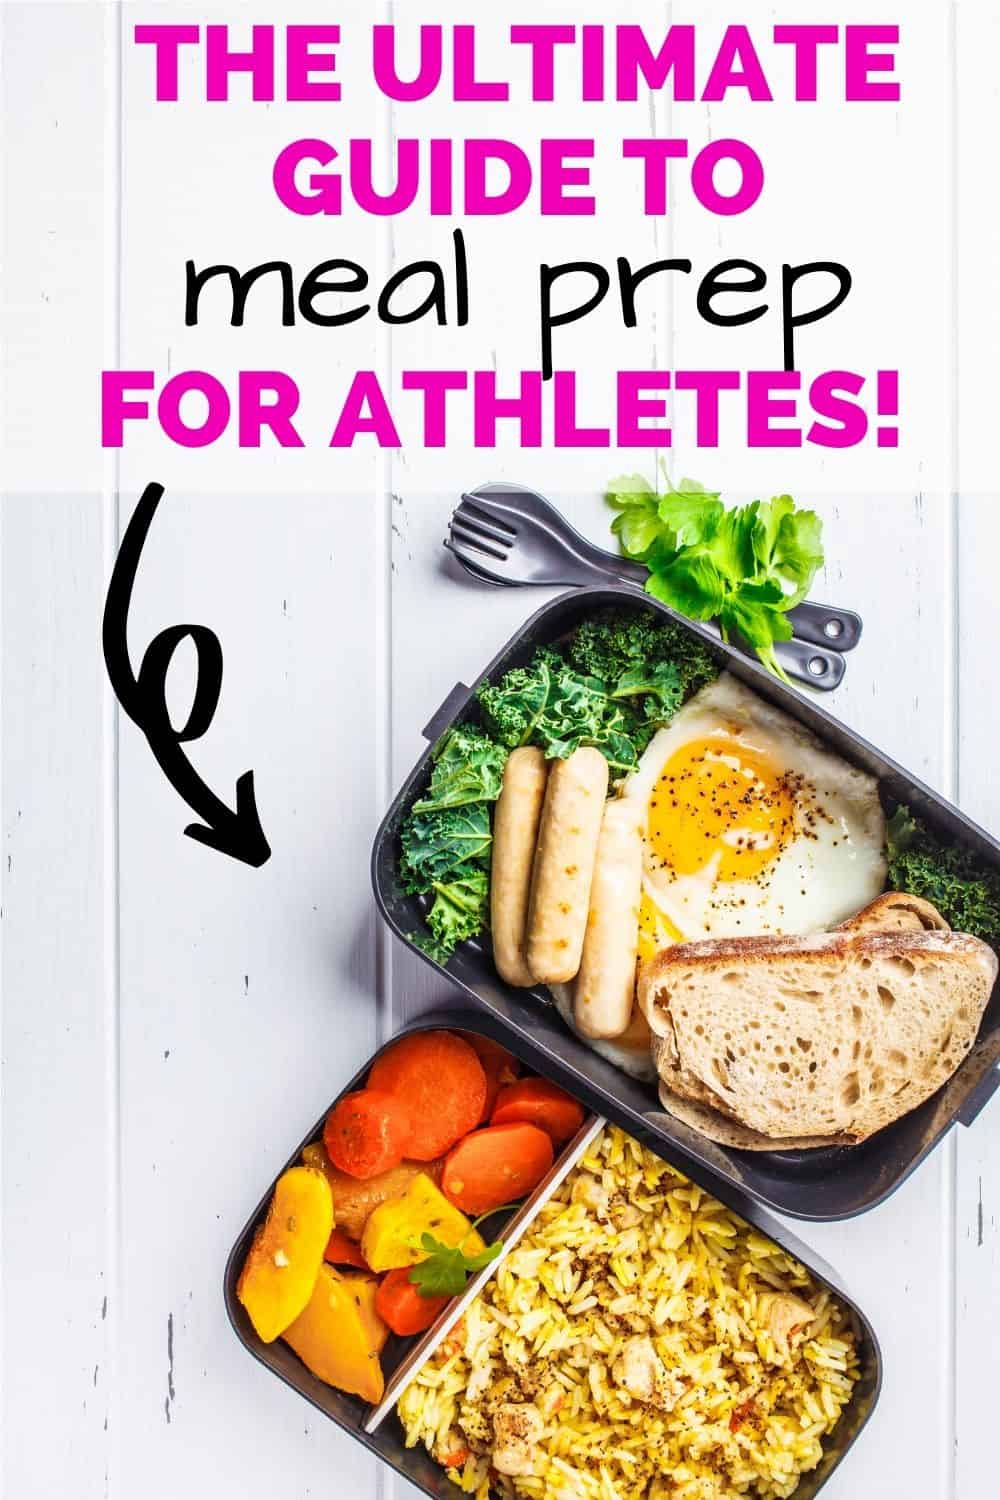 Quick and easy meal ideas for athletes